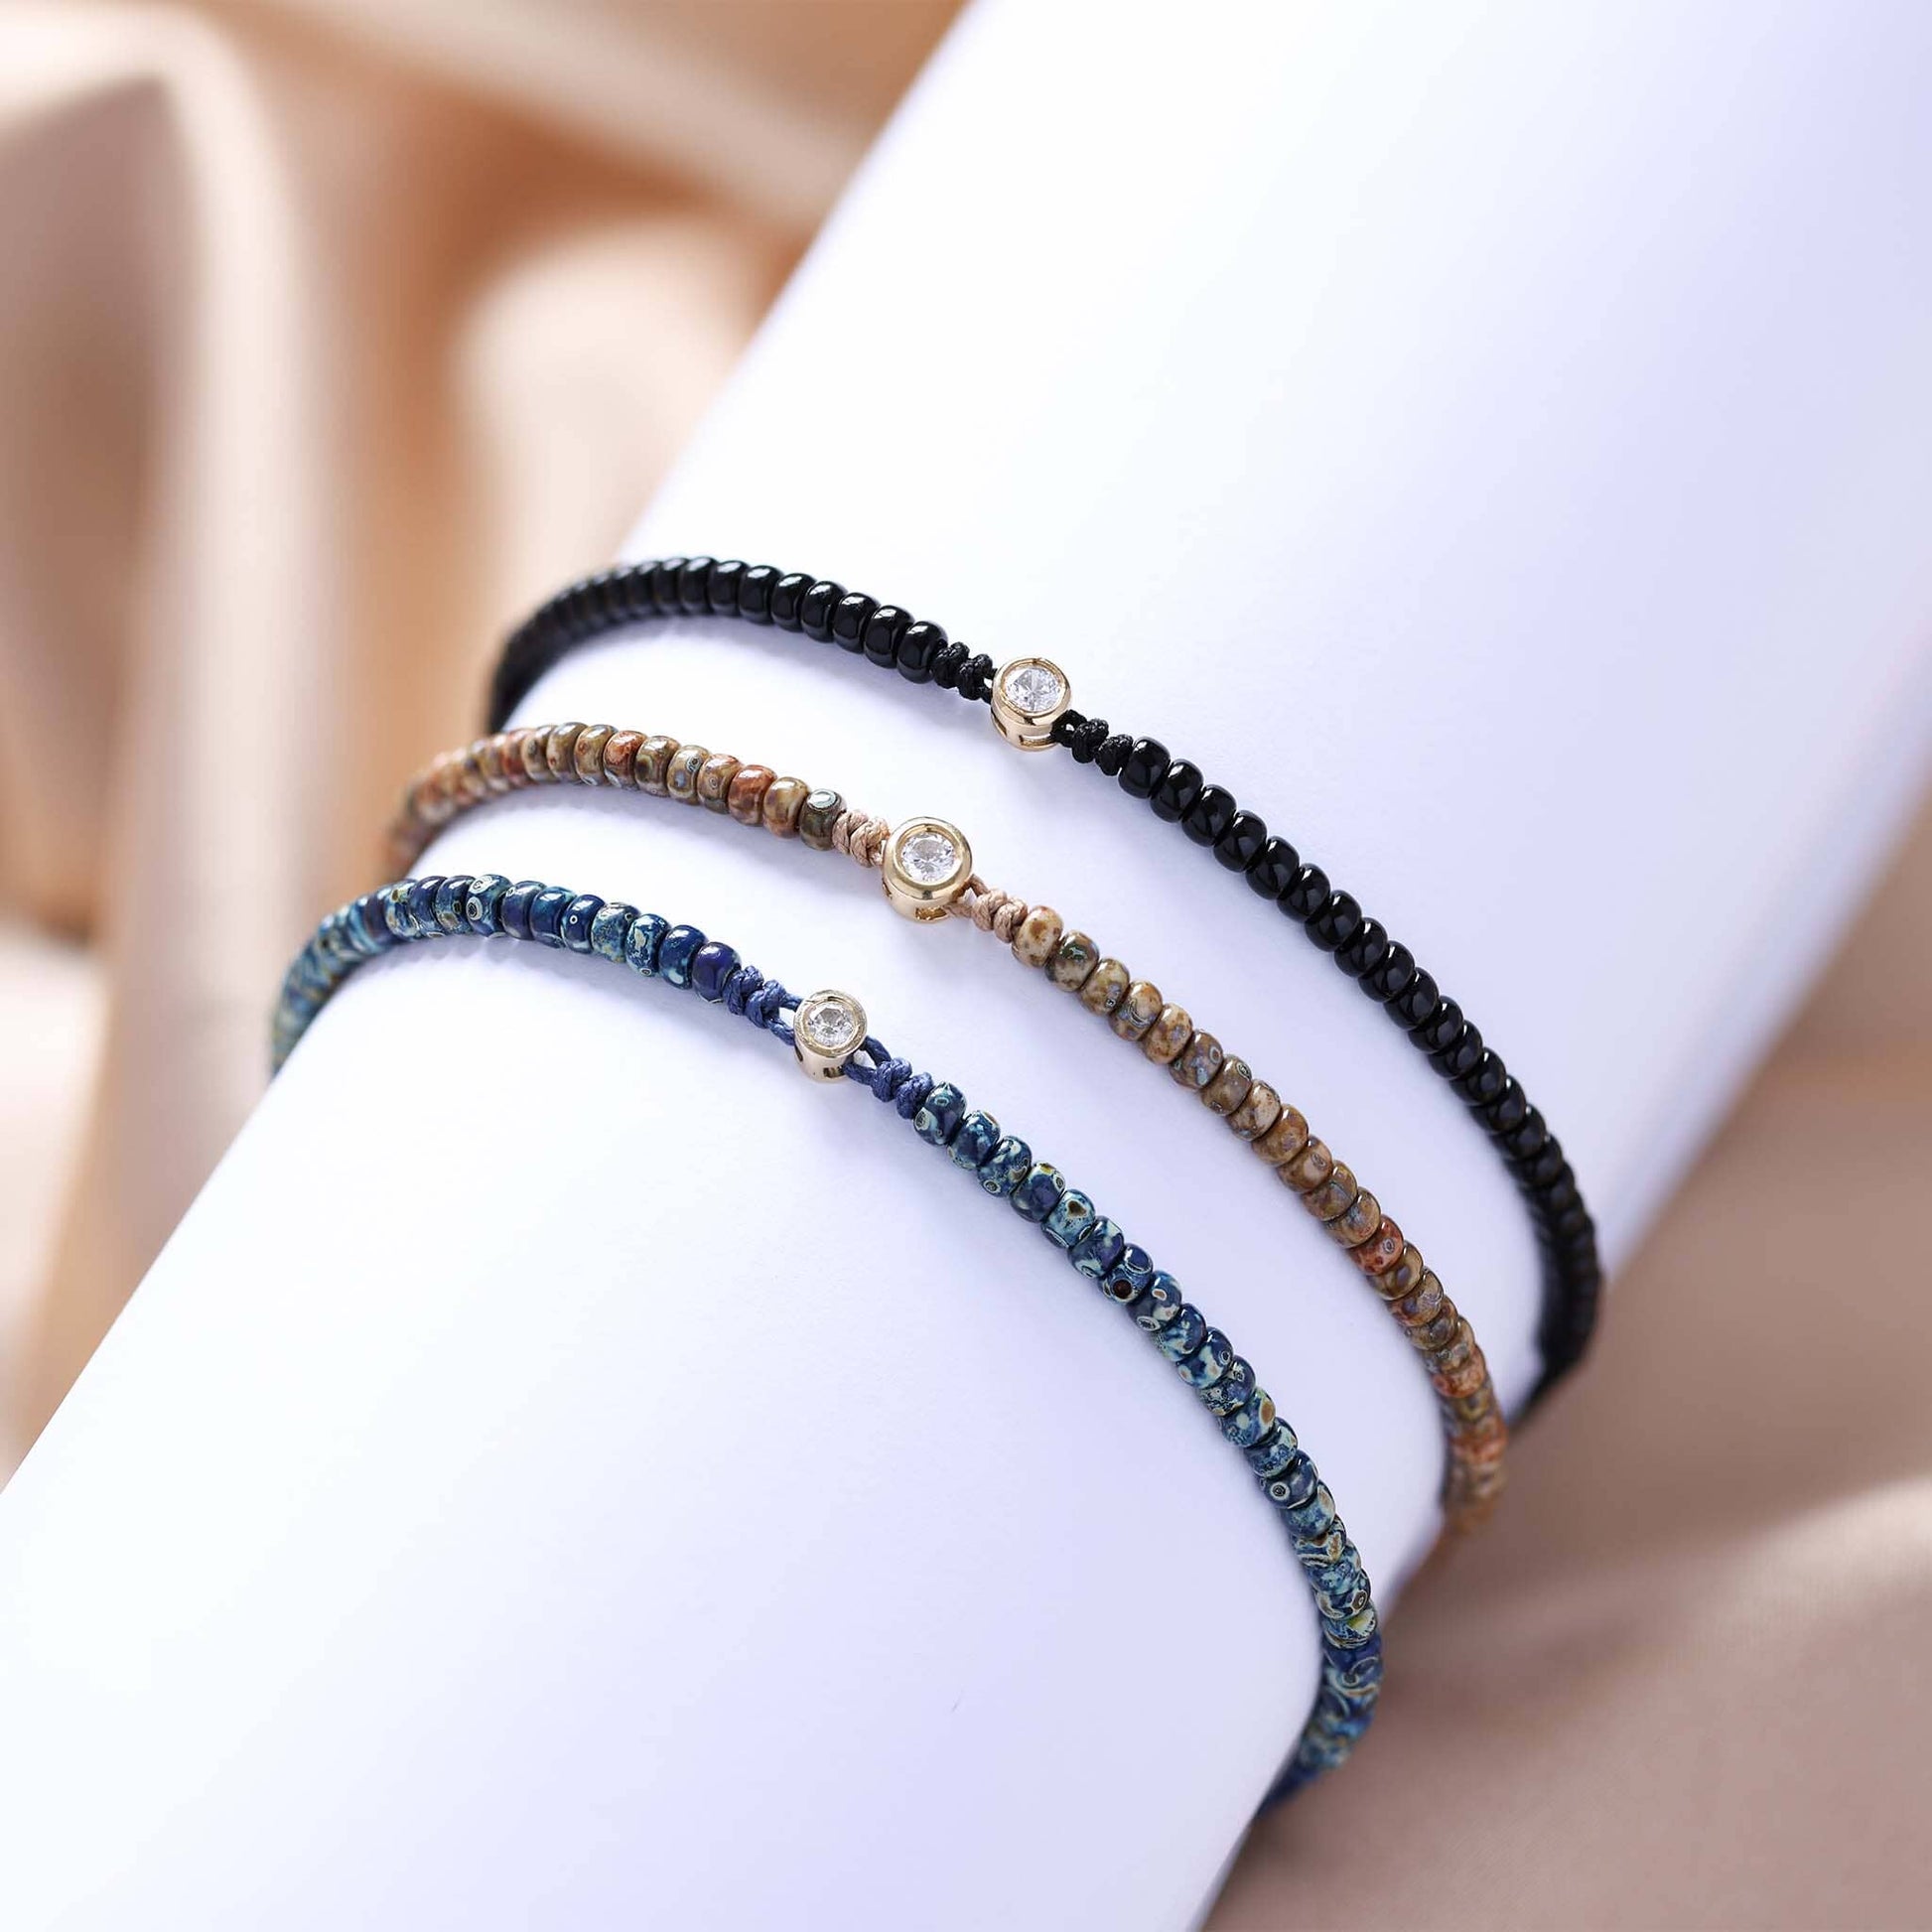 Dyed Brown Beads String Of Love - 14K Yellow Gold Bracelets magal-dev 